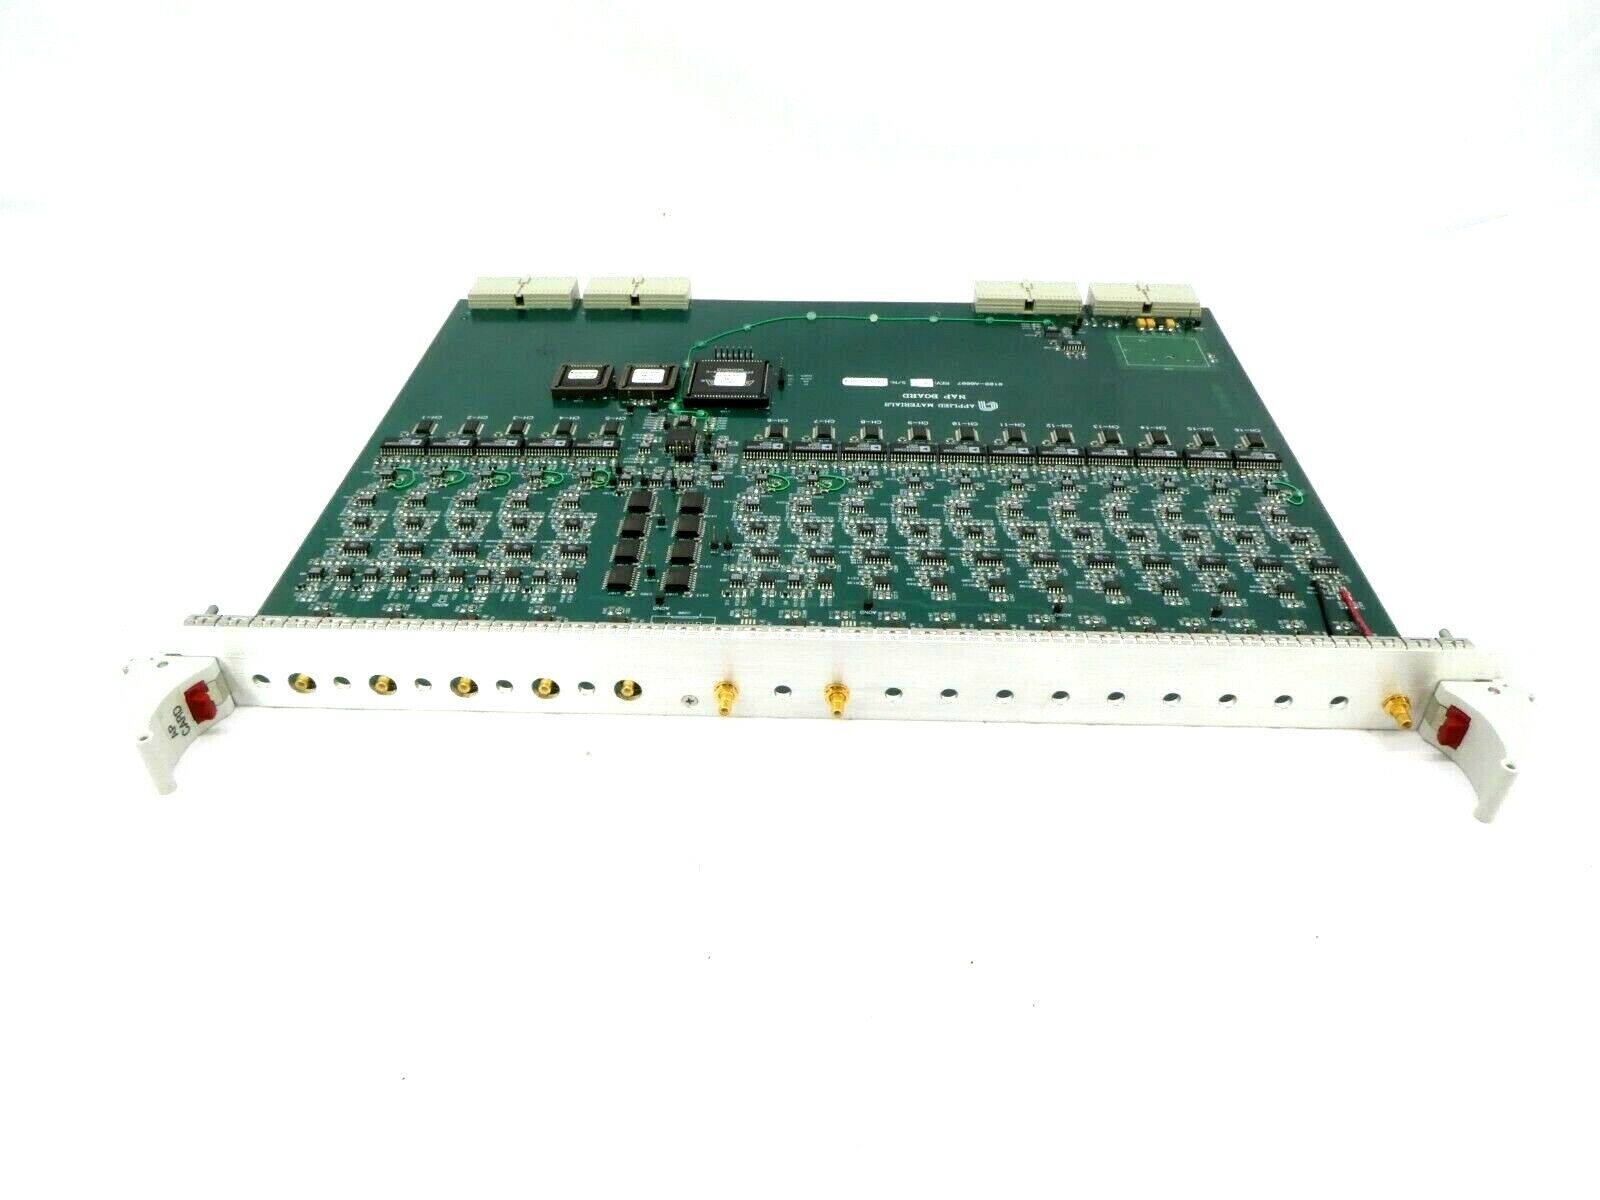 AMAT Applied Materials 0100-A0007 NAP Board PCB Card Rev. B 200mm Excite Working